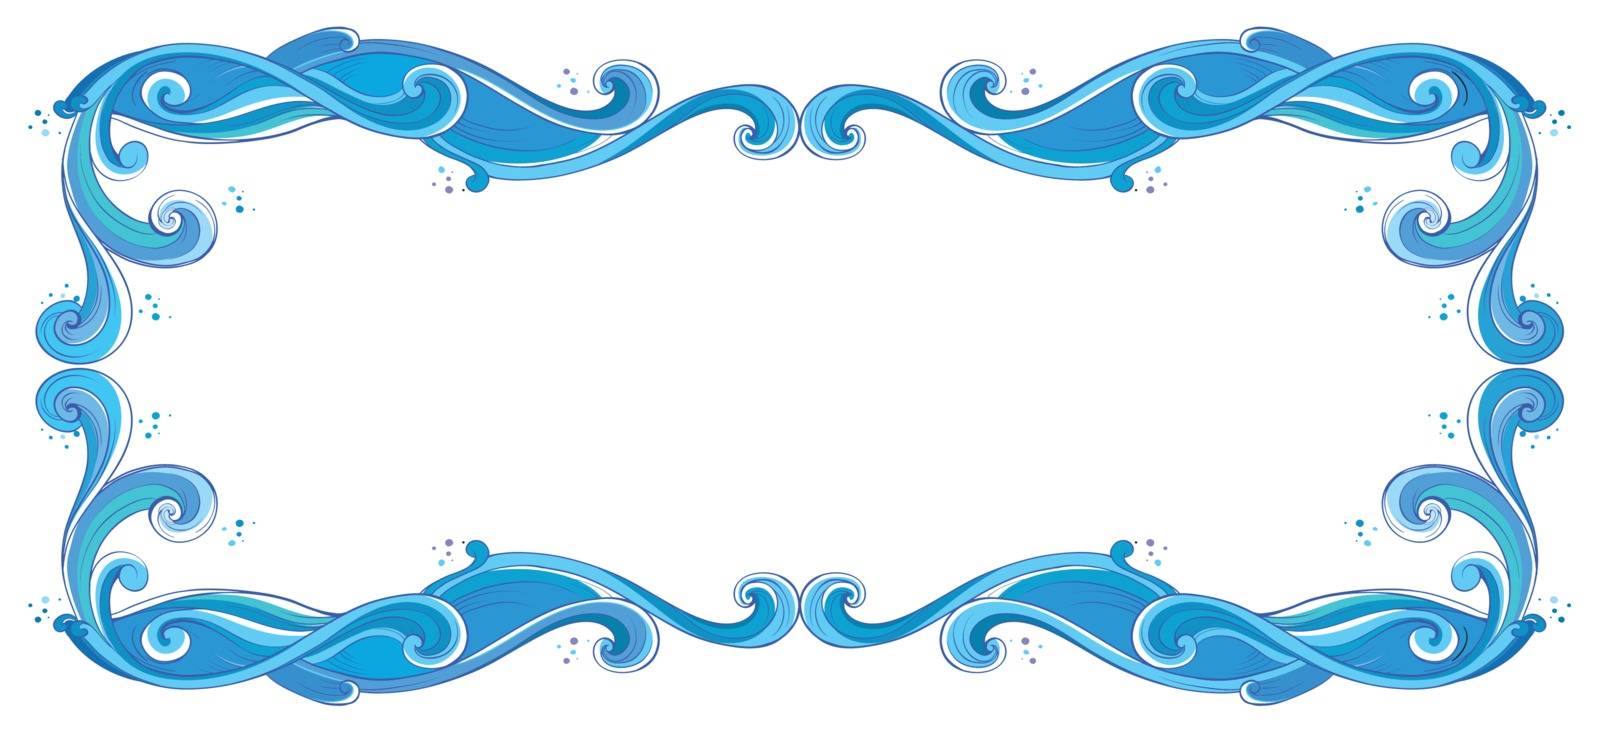 Illustration of a blue unique border on a white background